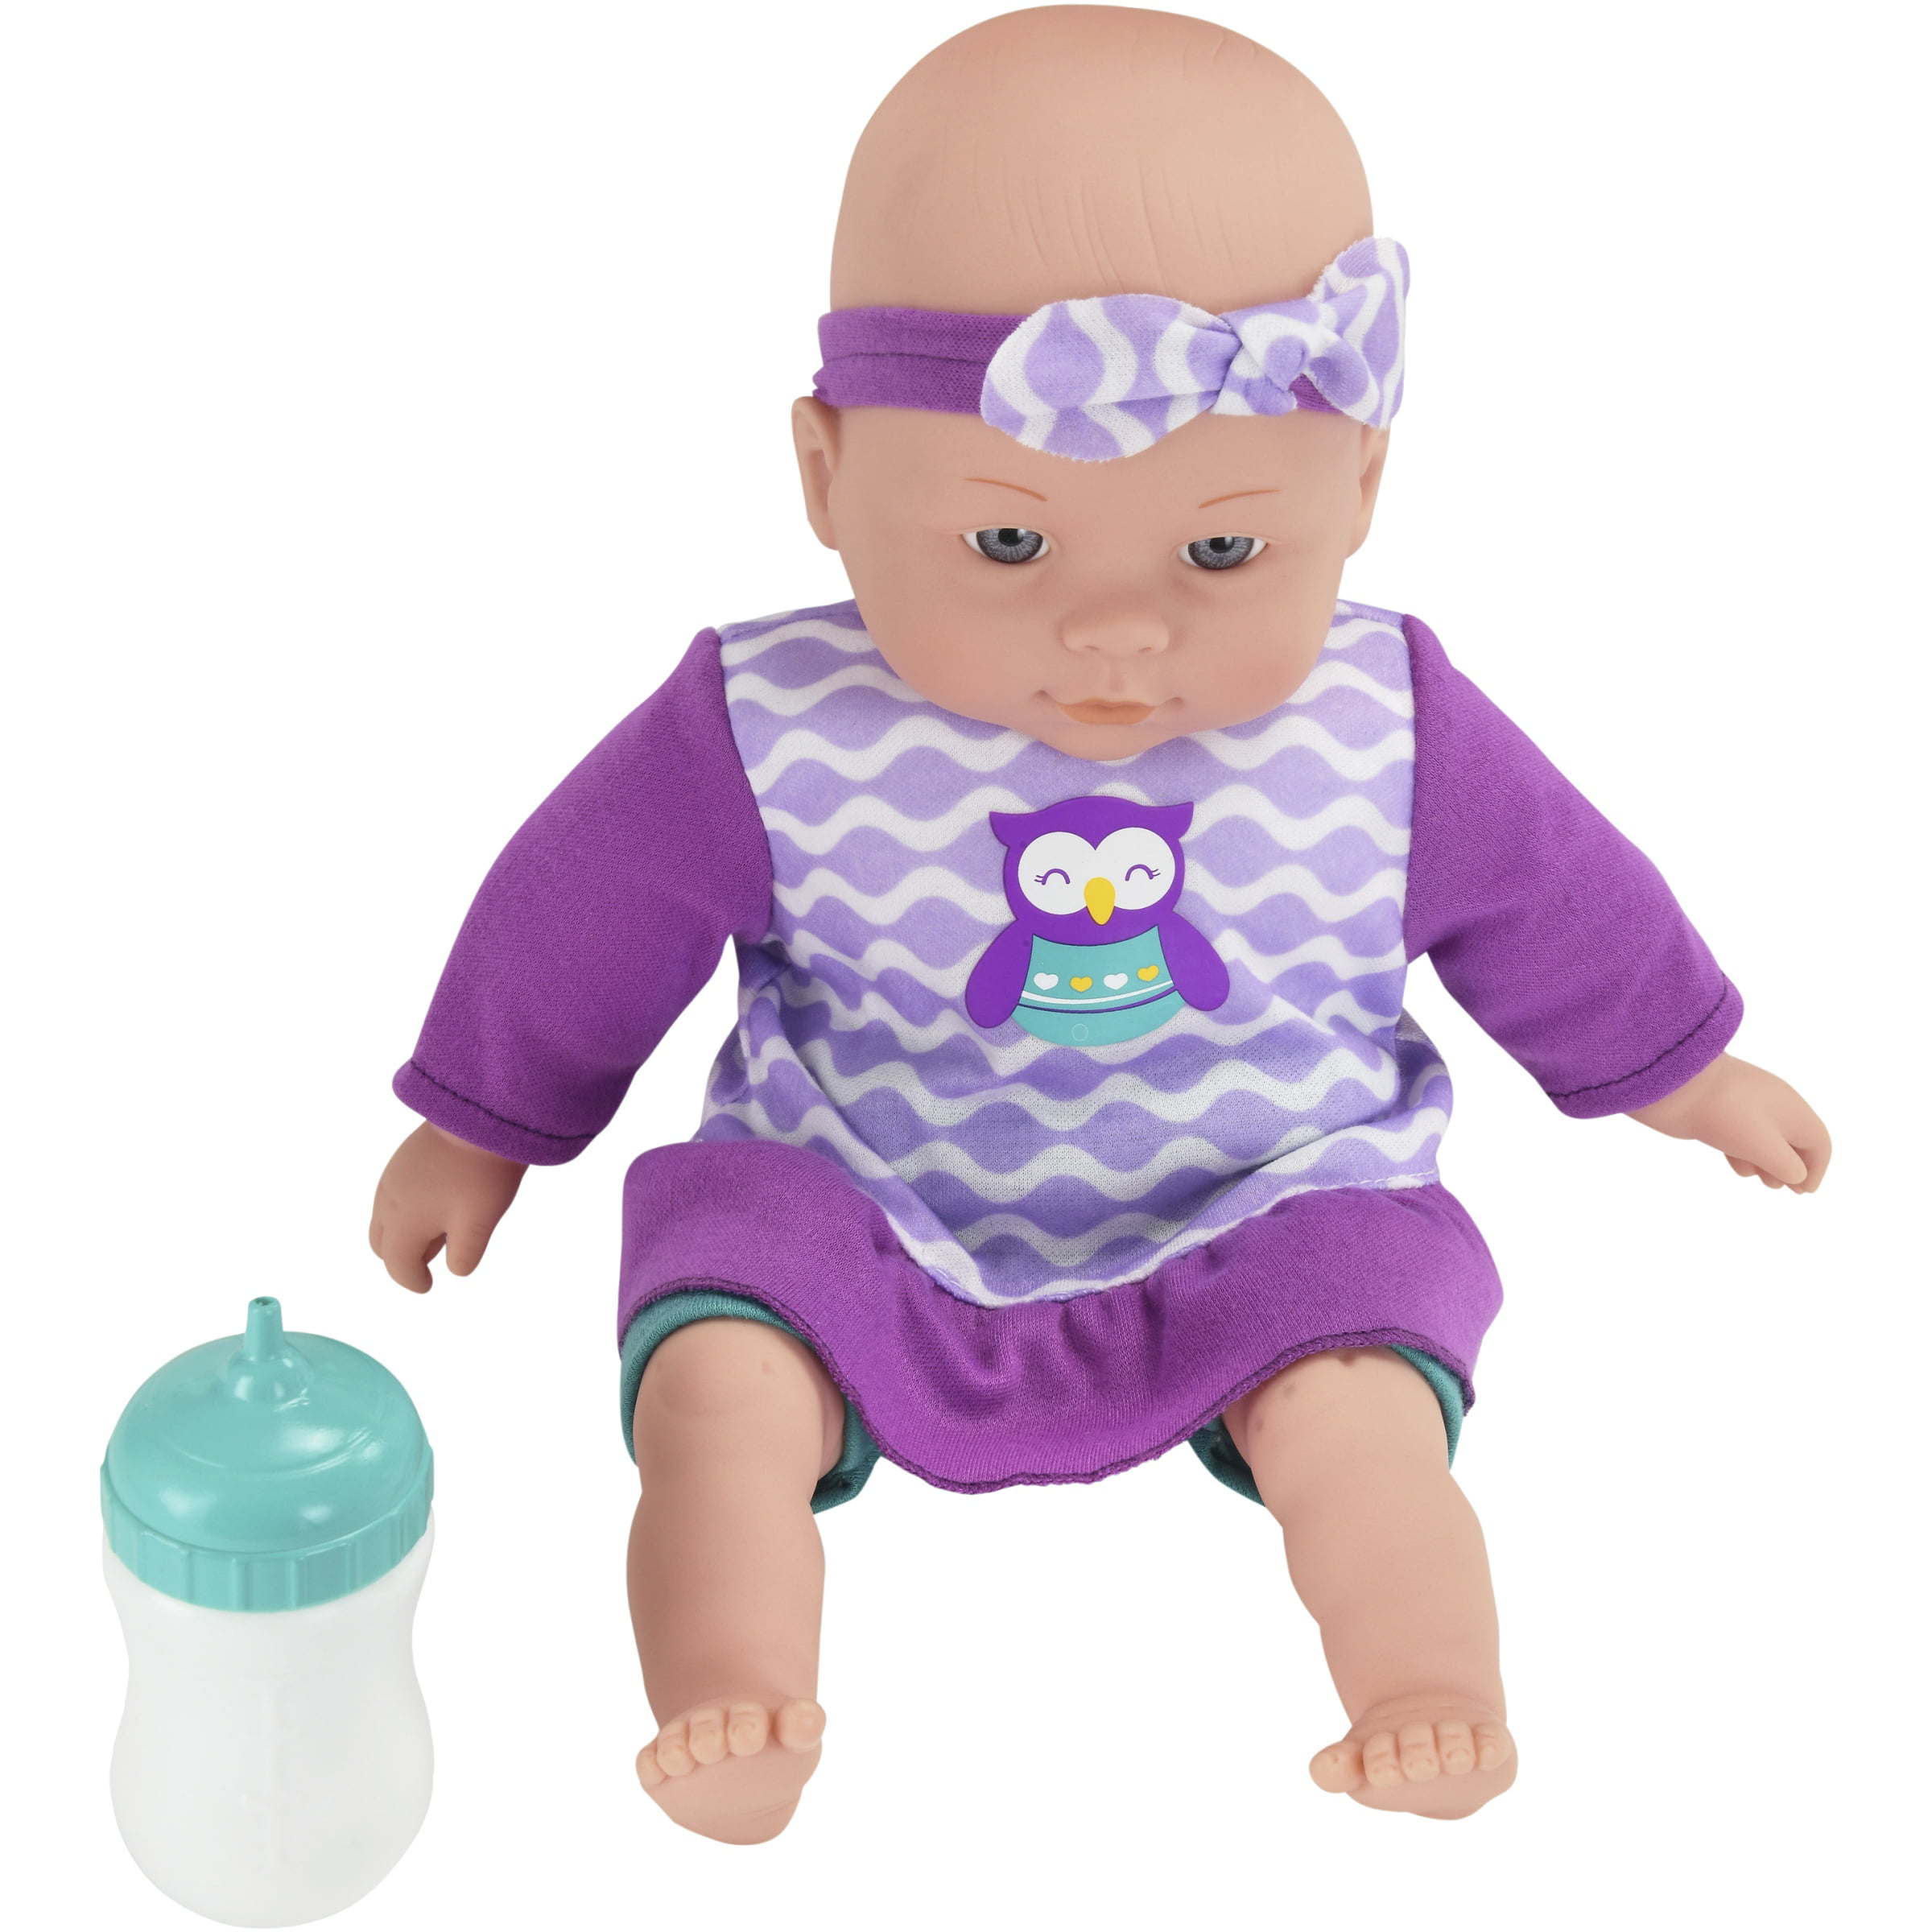 My Sweet Love 125 My Cuddly Baby With Sound Effects Purple Outfit